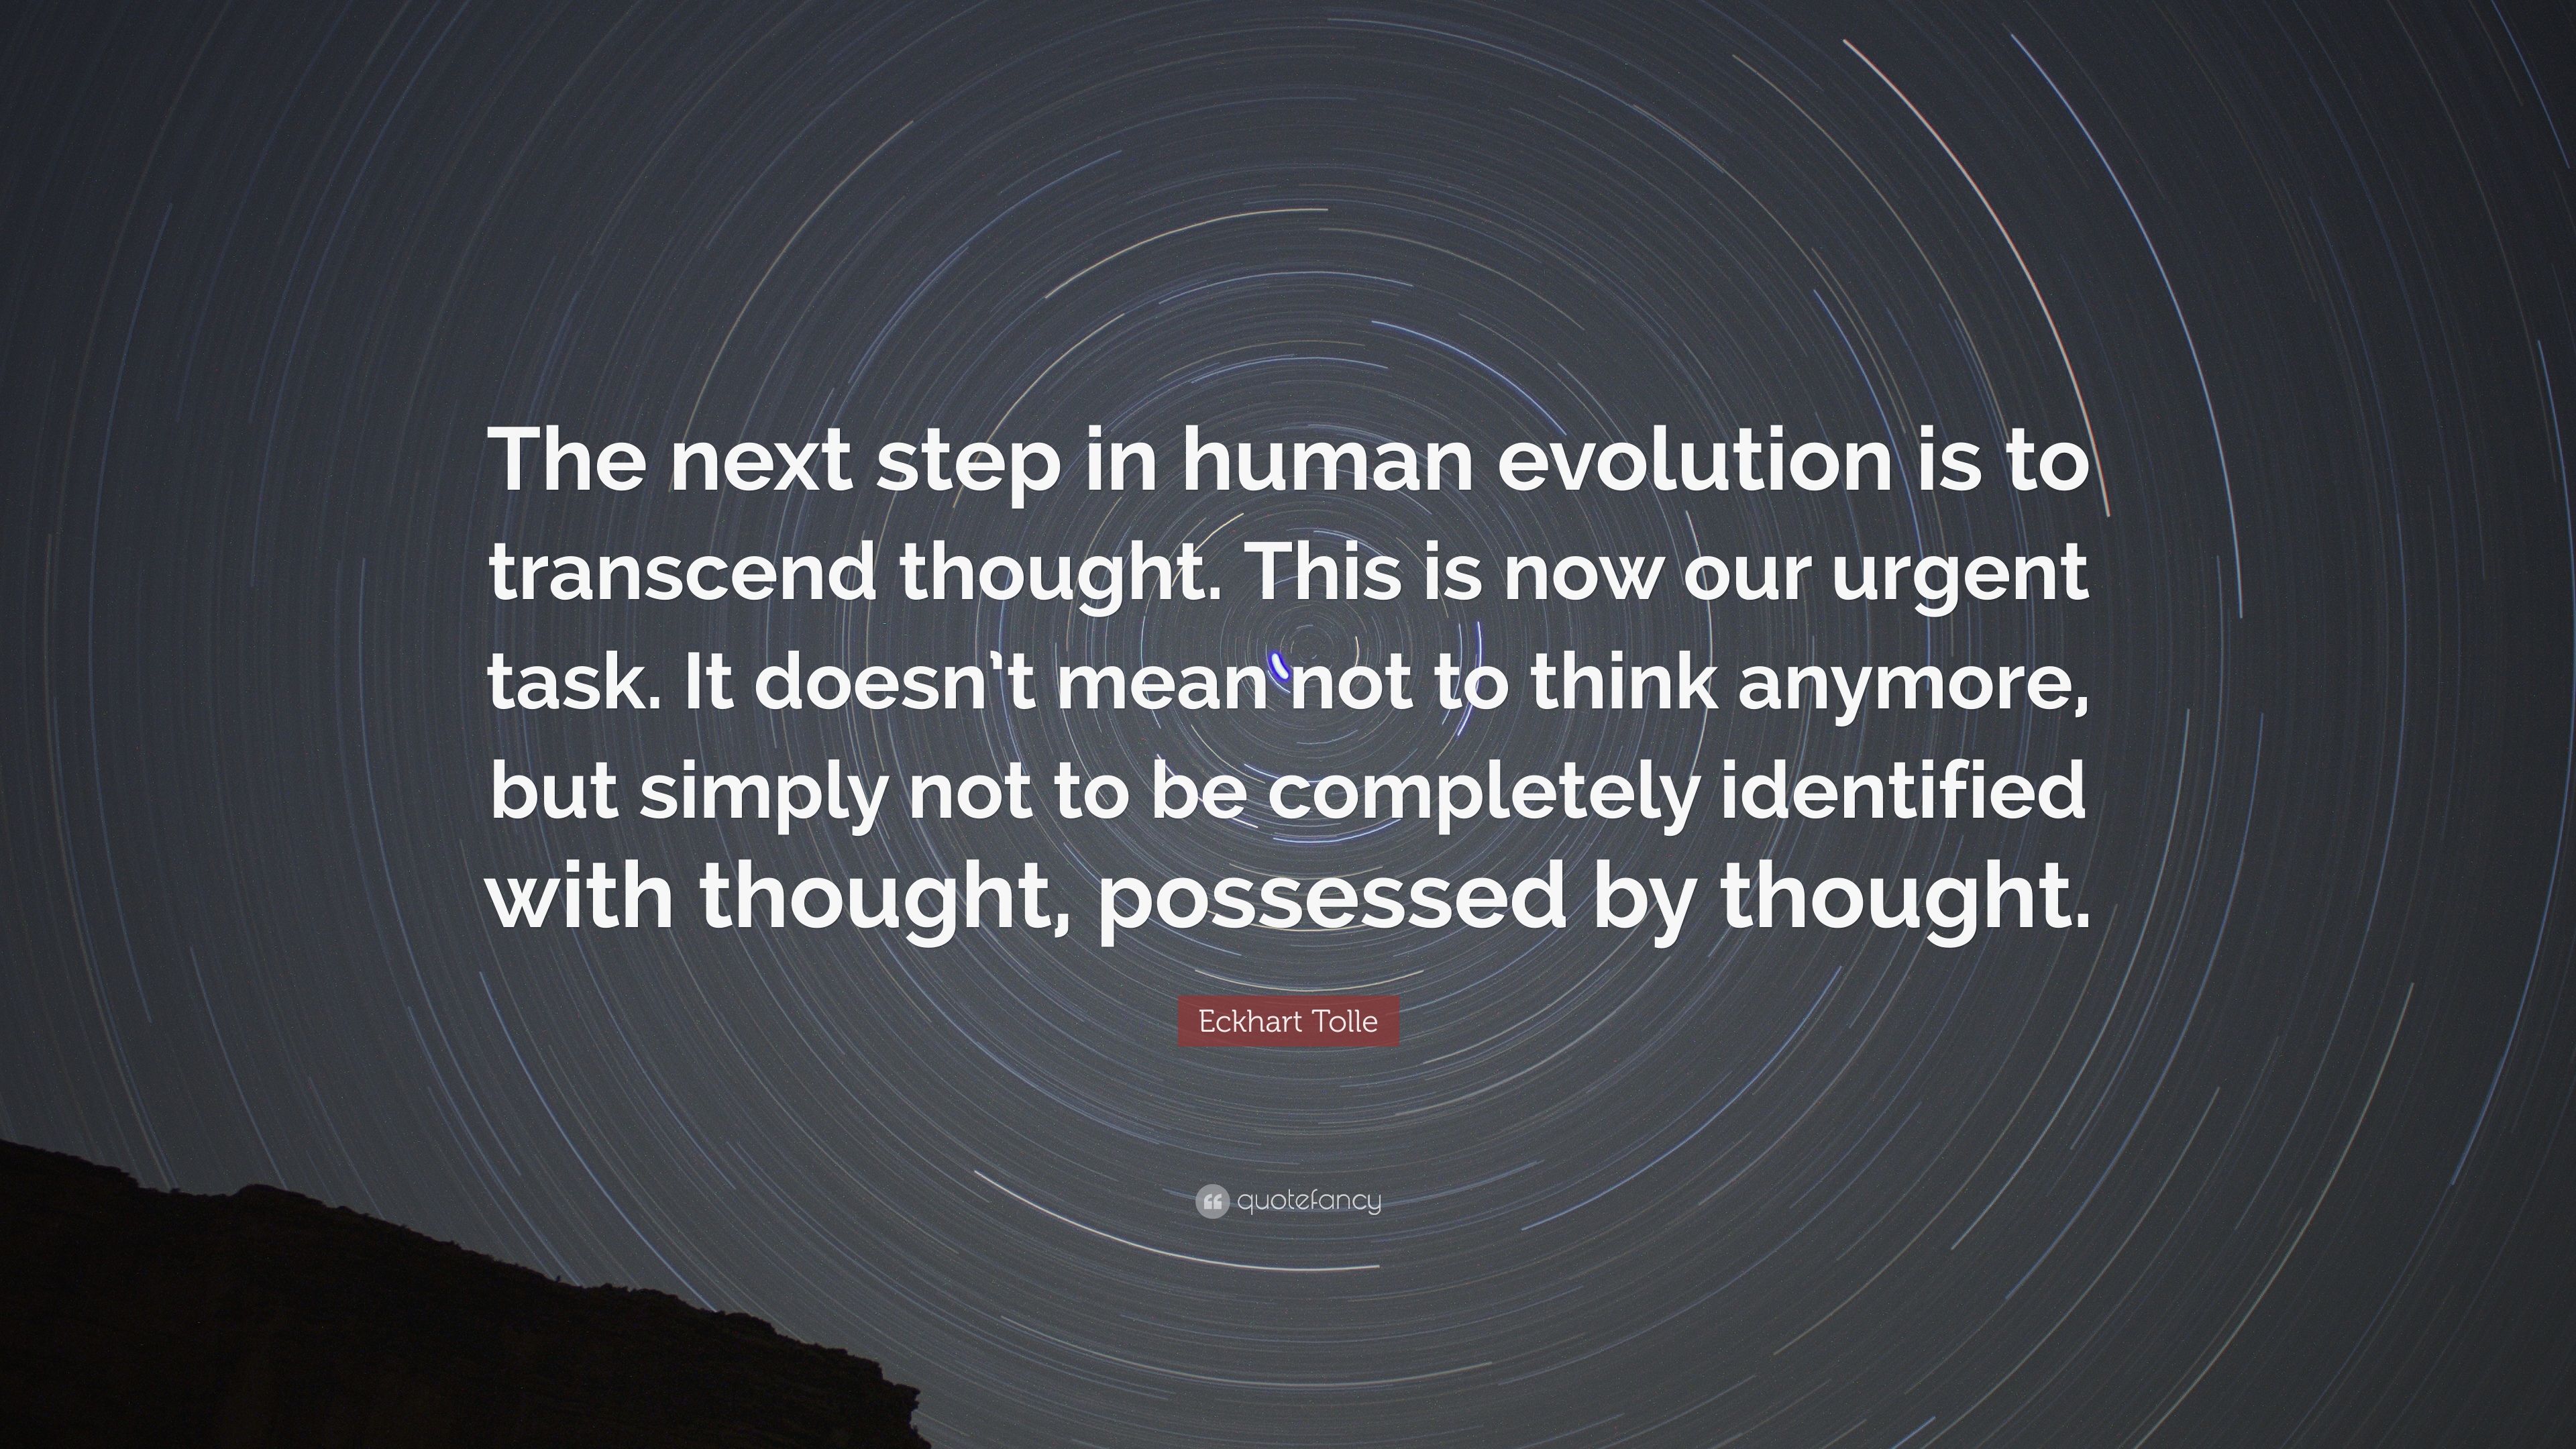 Eckhart Tolle Quote: “The next step in human evolution is to